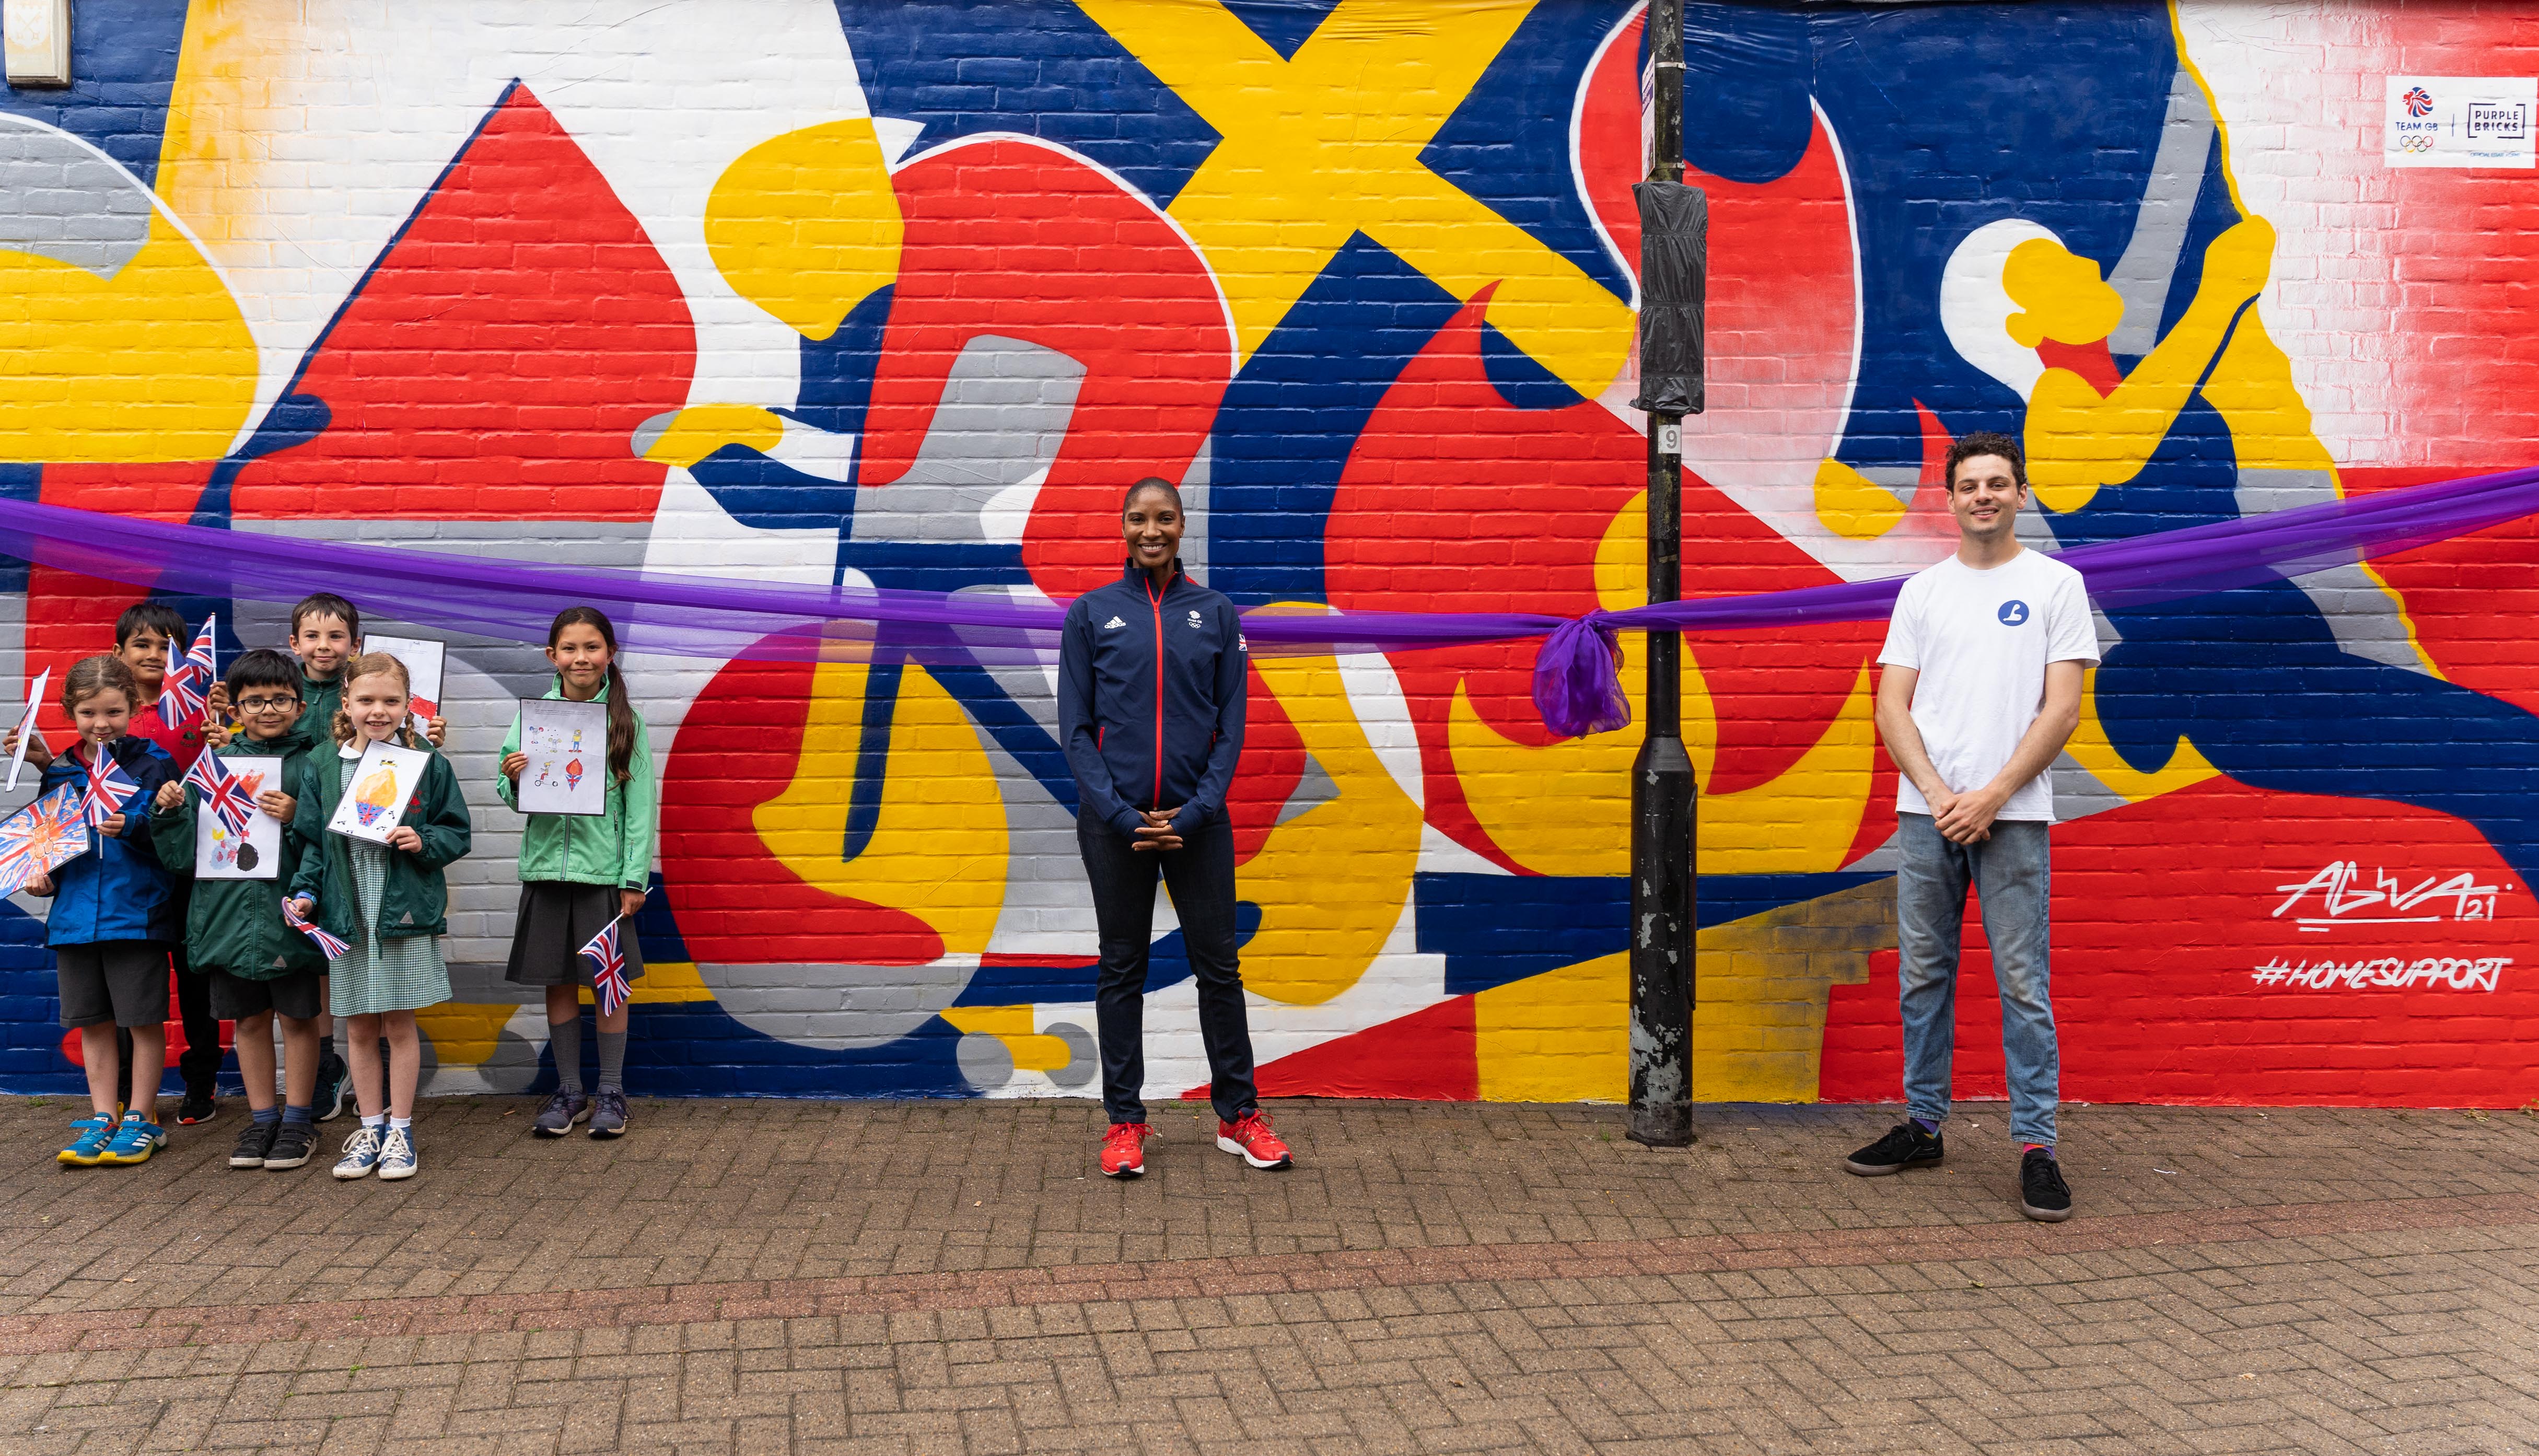 Three-time Olympian Denise Lewis and mouth artist Henry Fraser unite to drive home support for Team GB with ‘art relay’